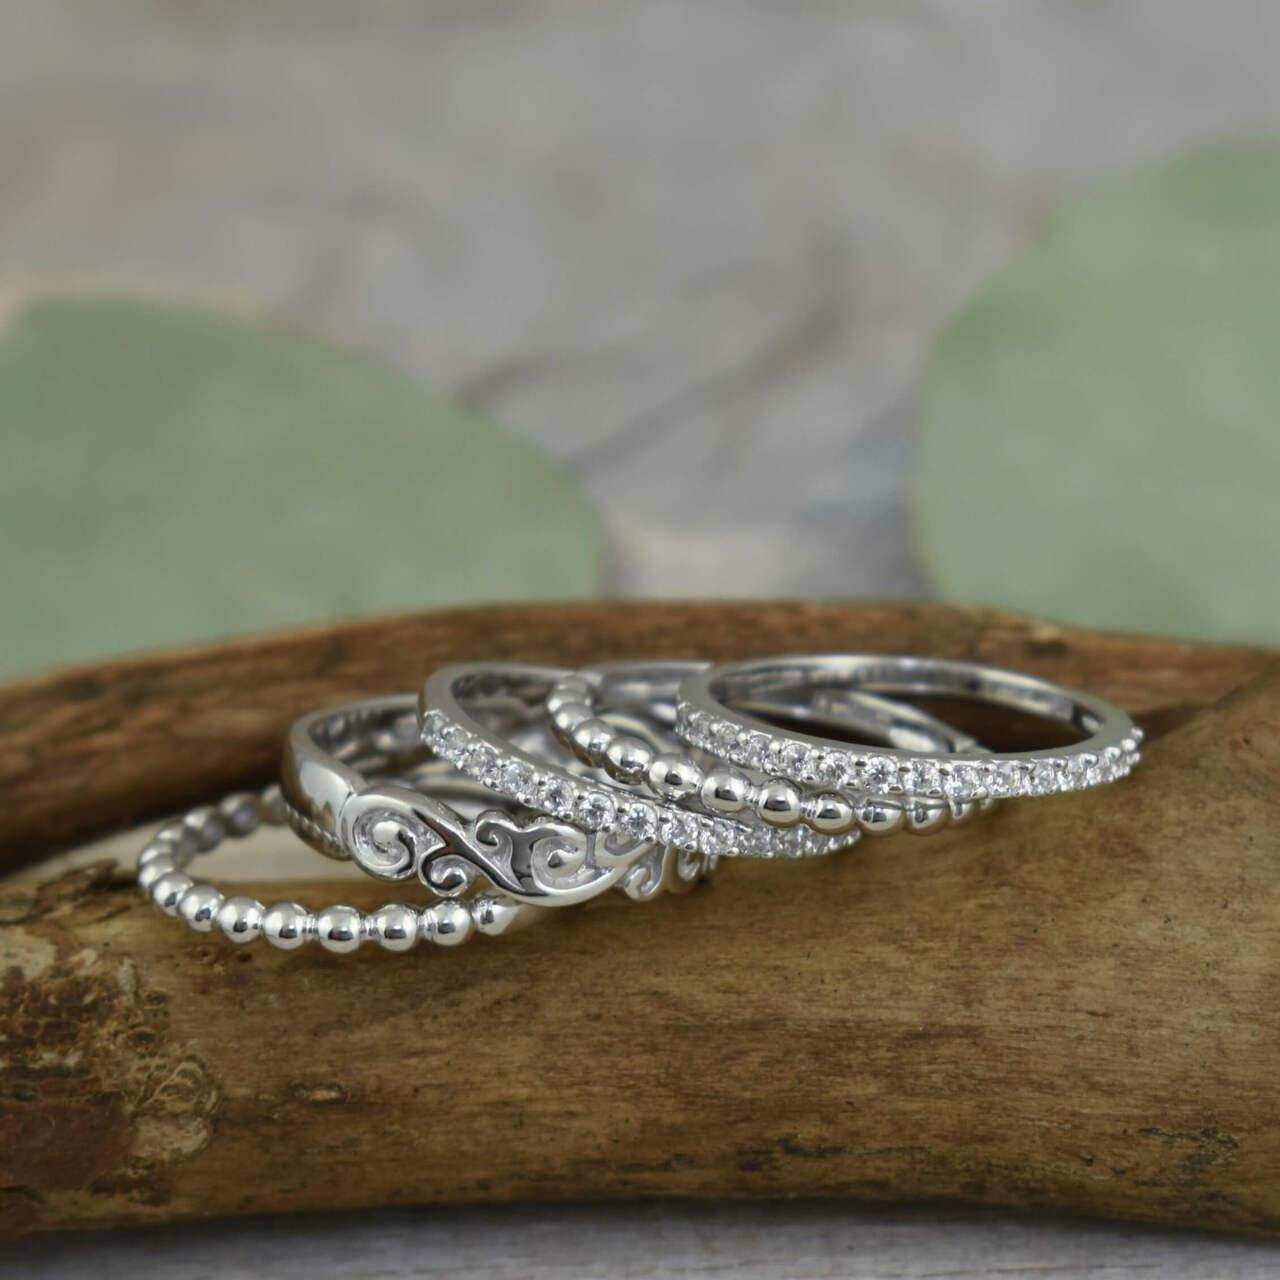 Set of 5 sterling silver stack rings